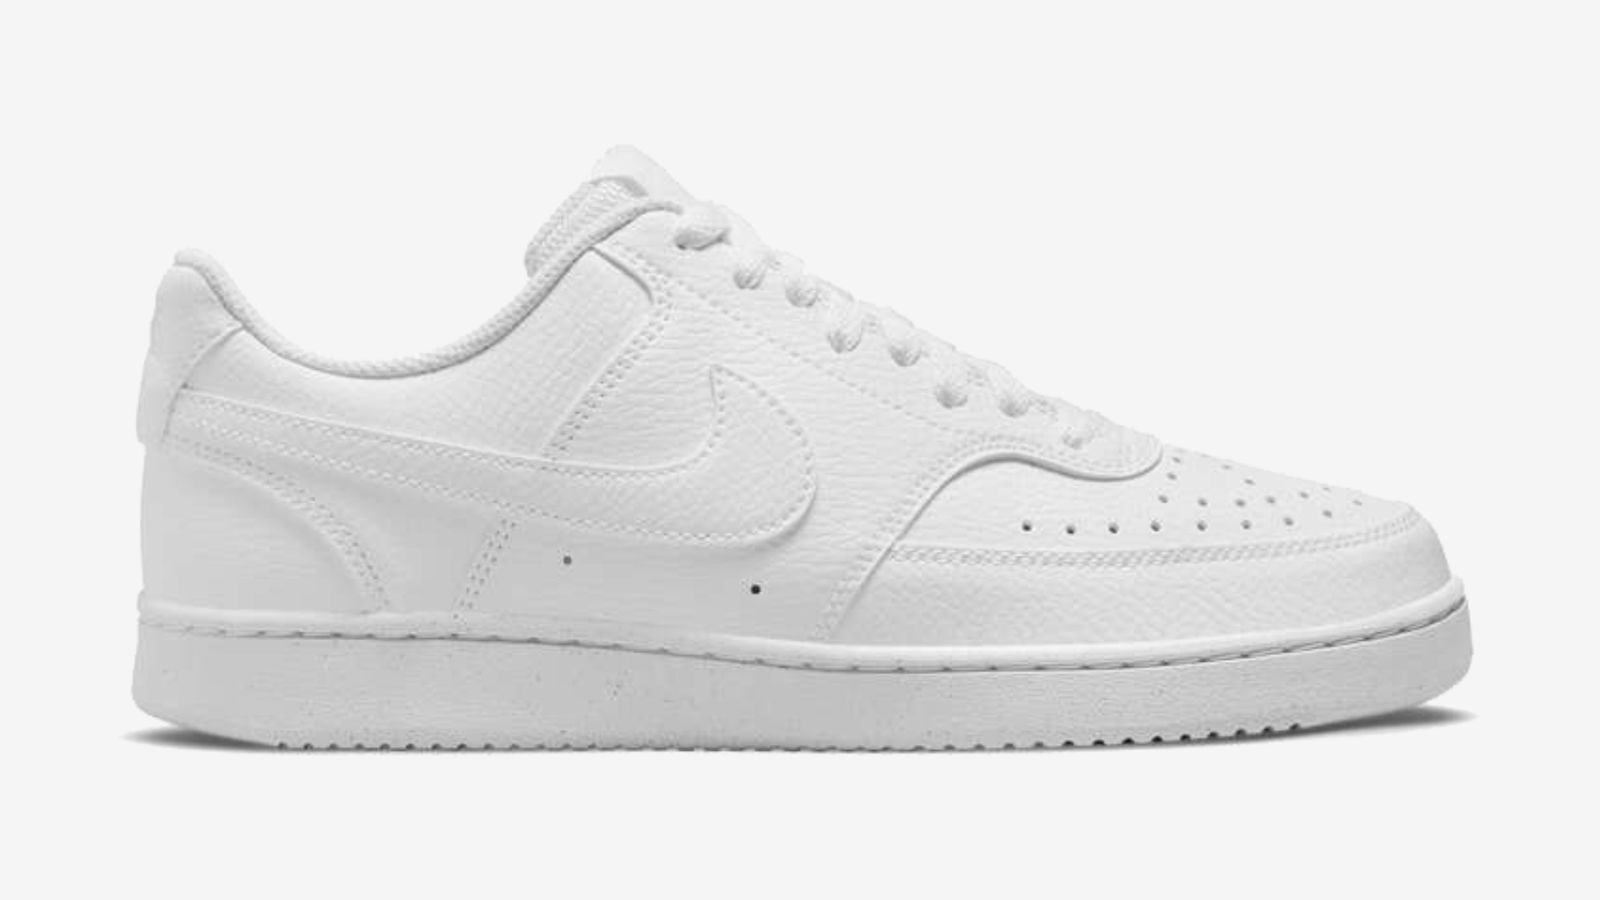 Nike Court Vision product image of a all-white low-top sneaker.